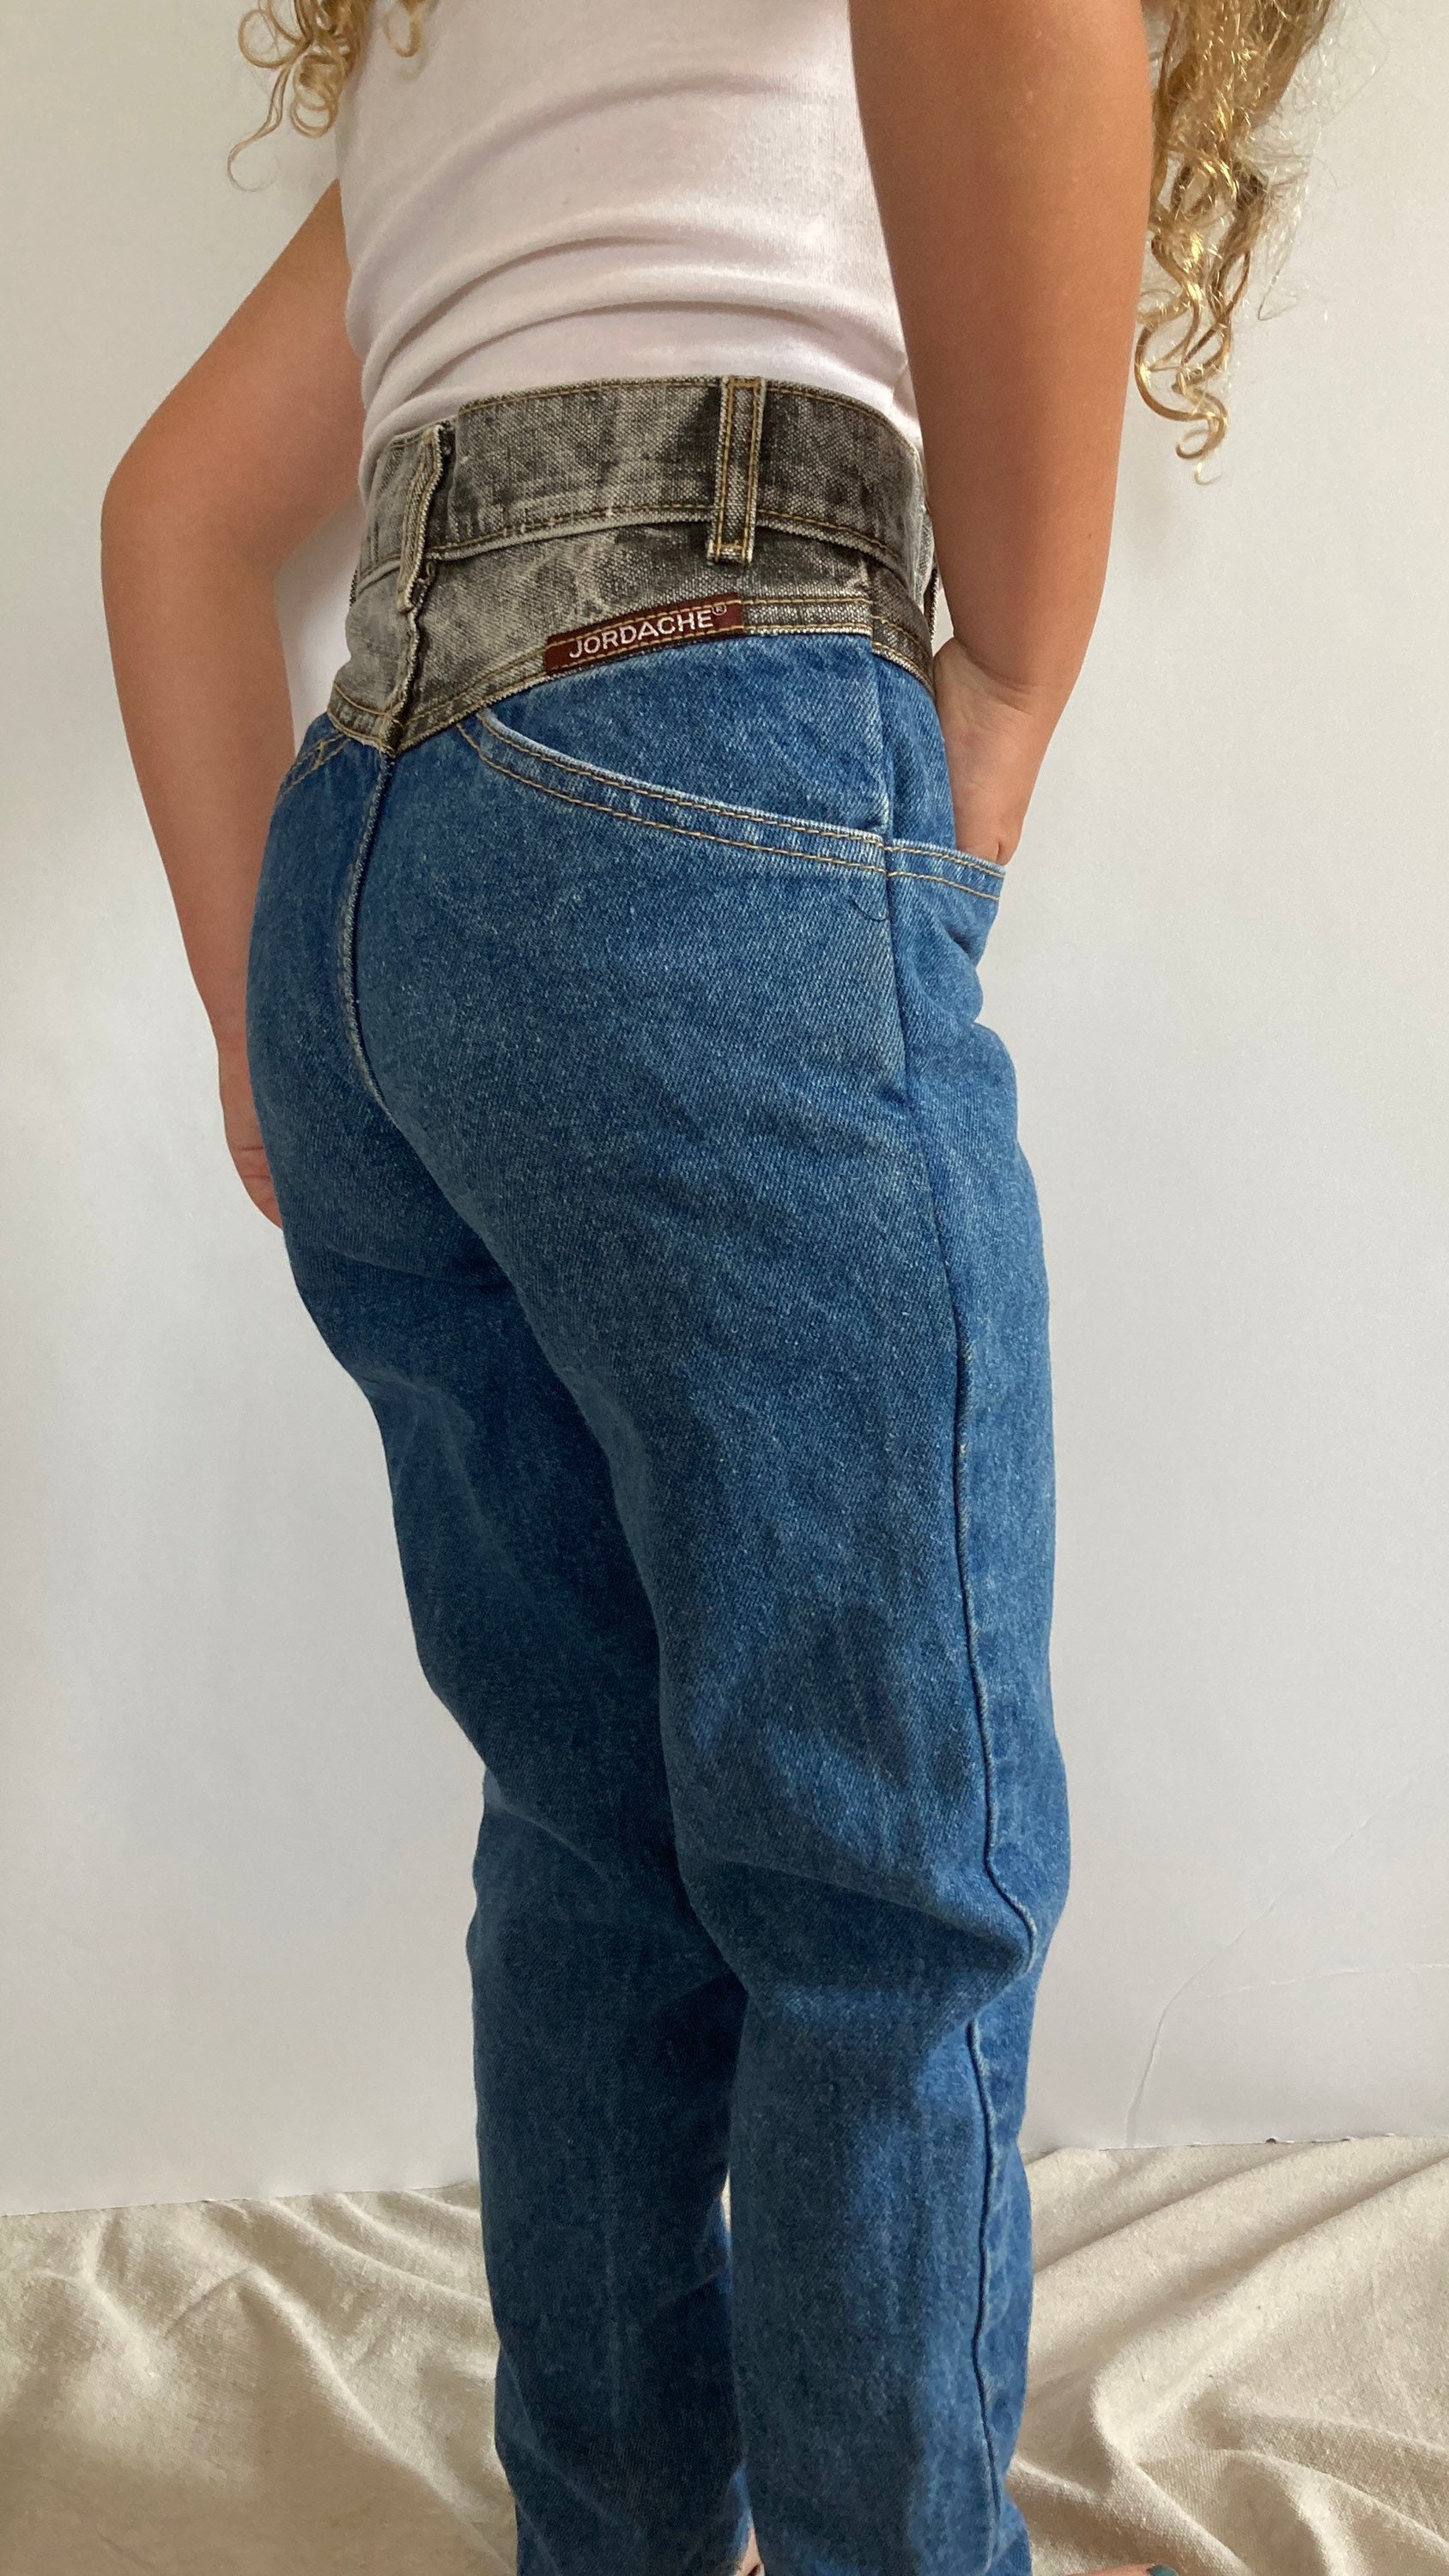 1980s, 1990s, Vintage Jordache Jeans, Two Tone Denim, High Rise Jeans,  Tapered, High Waisted, Rare Retro Kids Jeans, 5T, 6, Usa Made, 20 